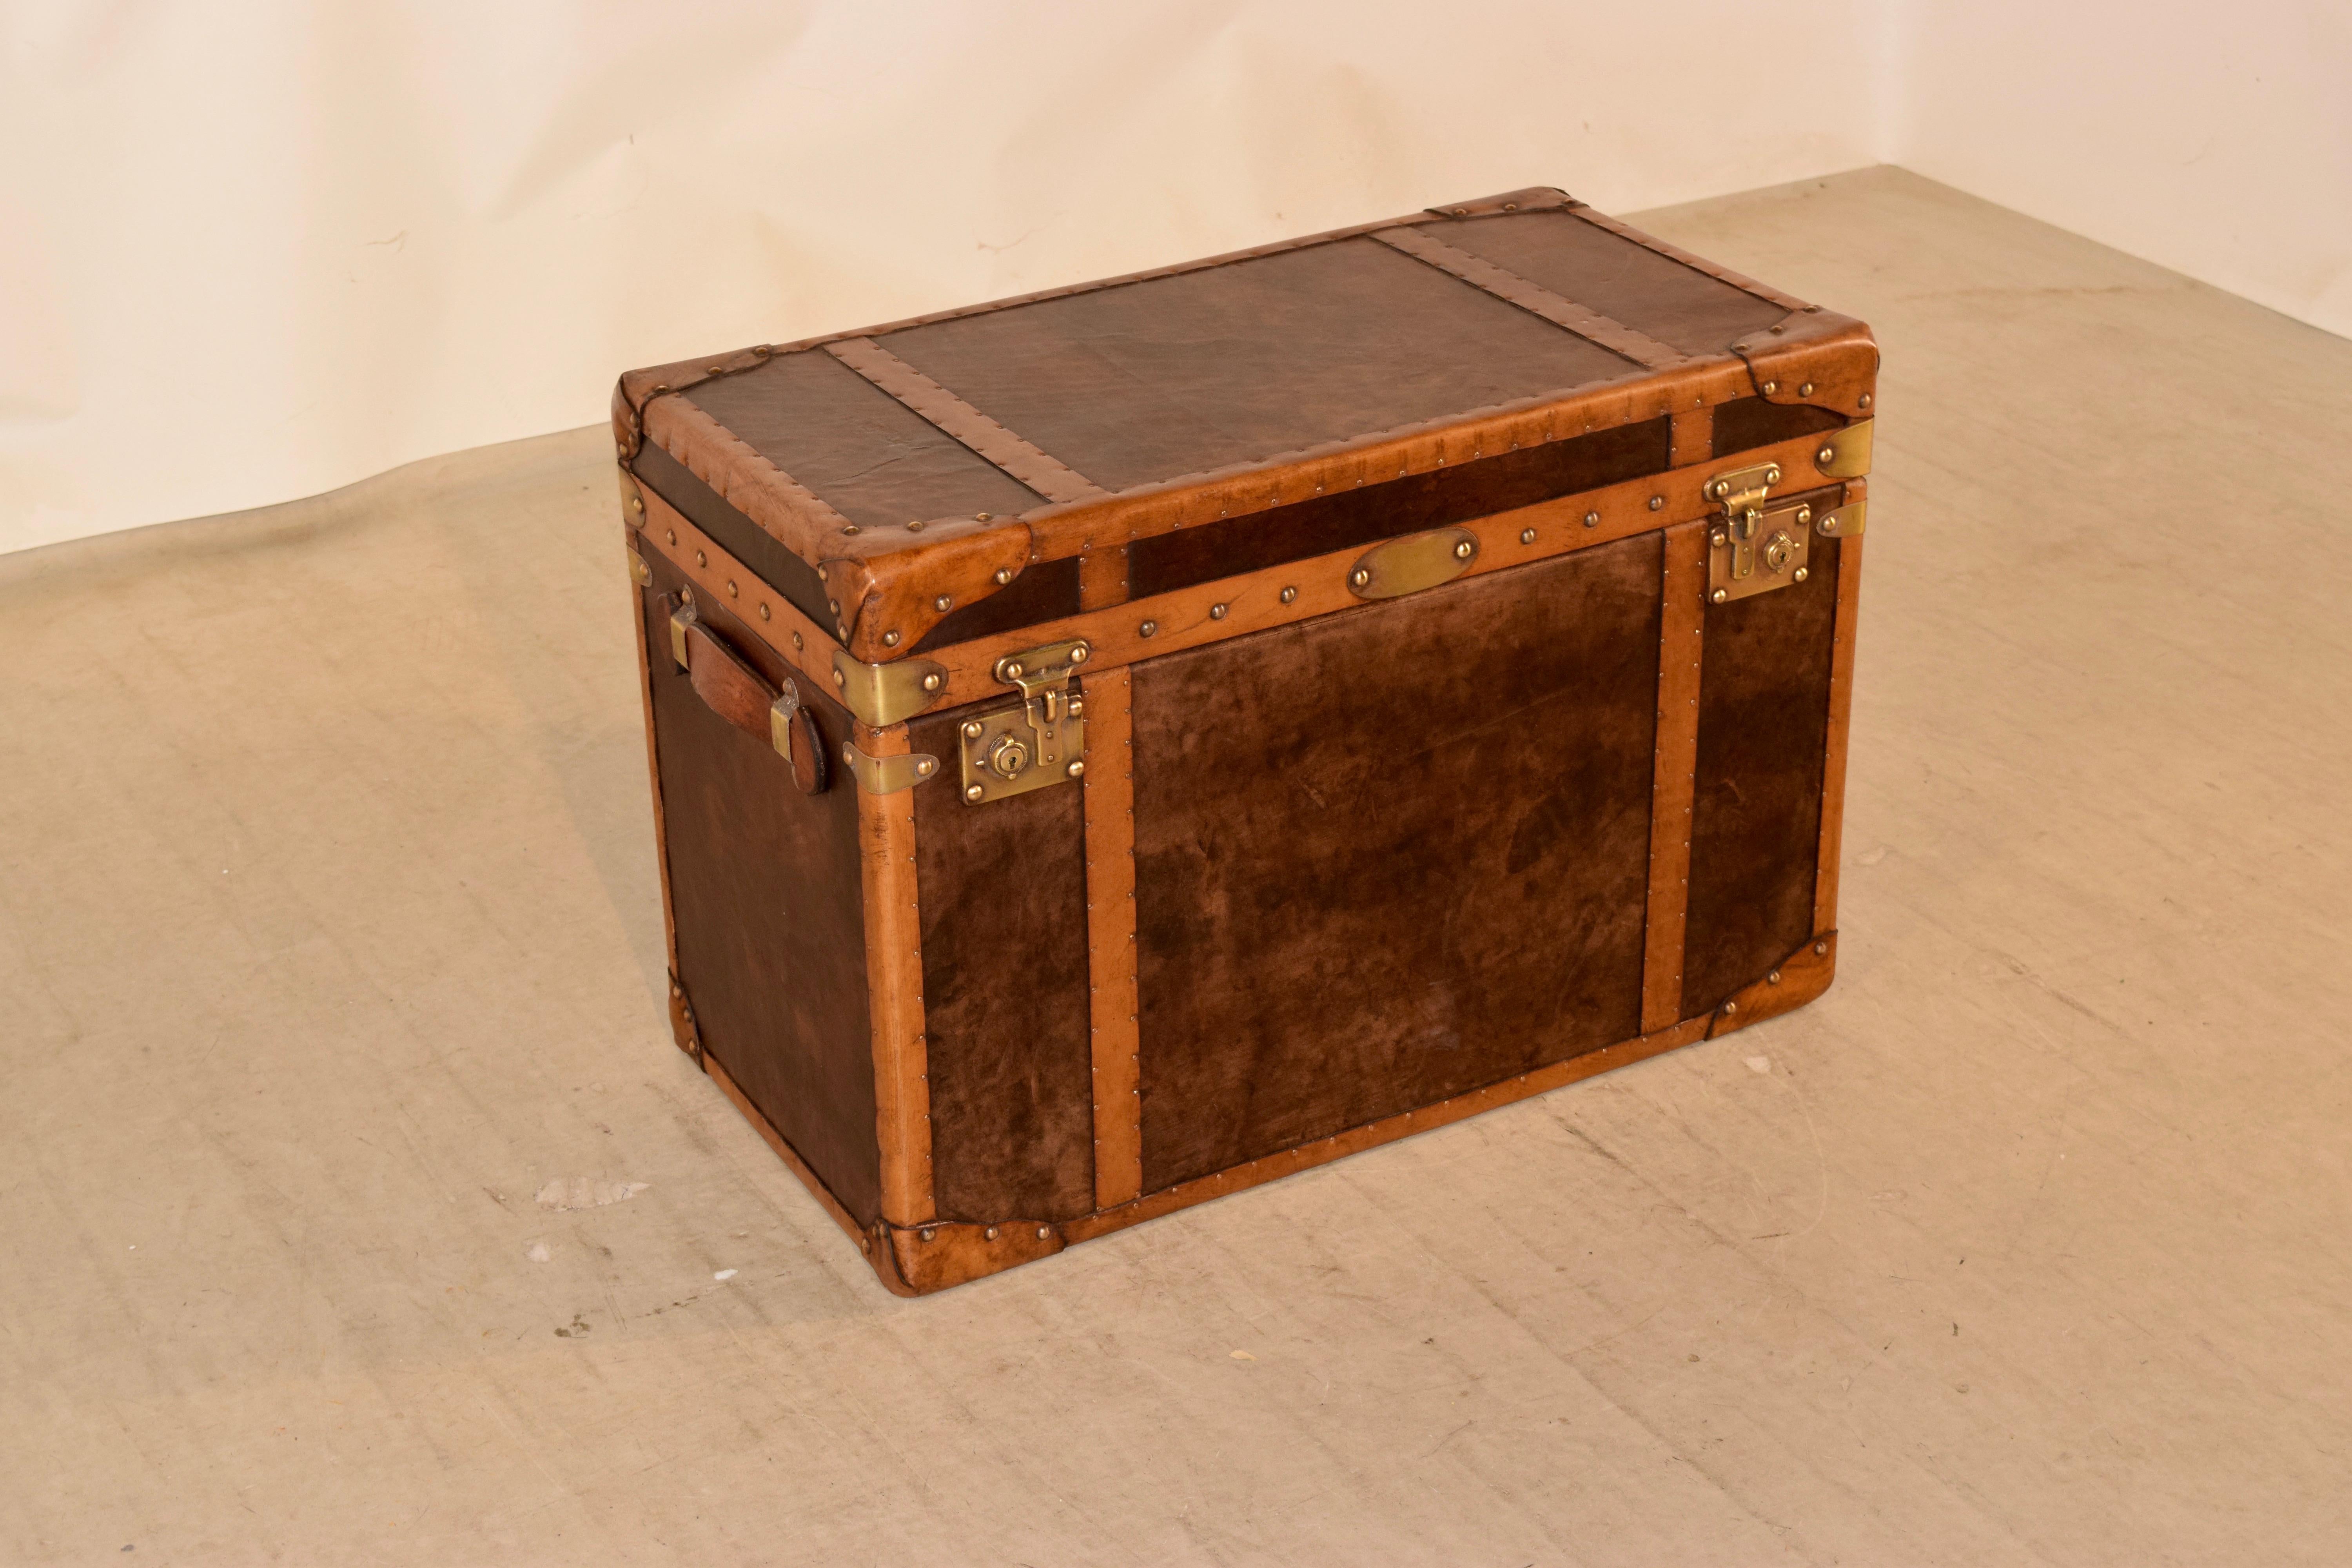 Early 20th century English steamer trunk which has been completely refurbished. The exterior features contrasting colors of leather with brass nail decoration, along with brass hardware and new interior lining.